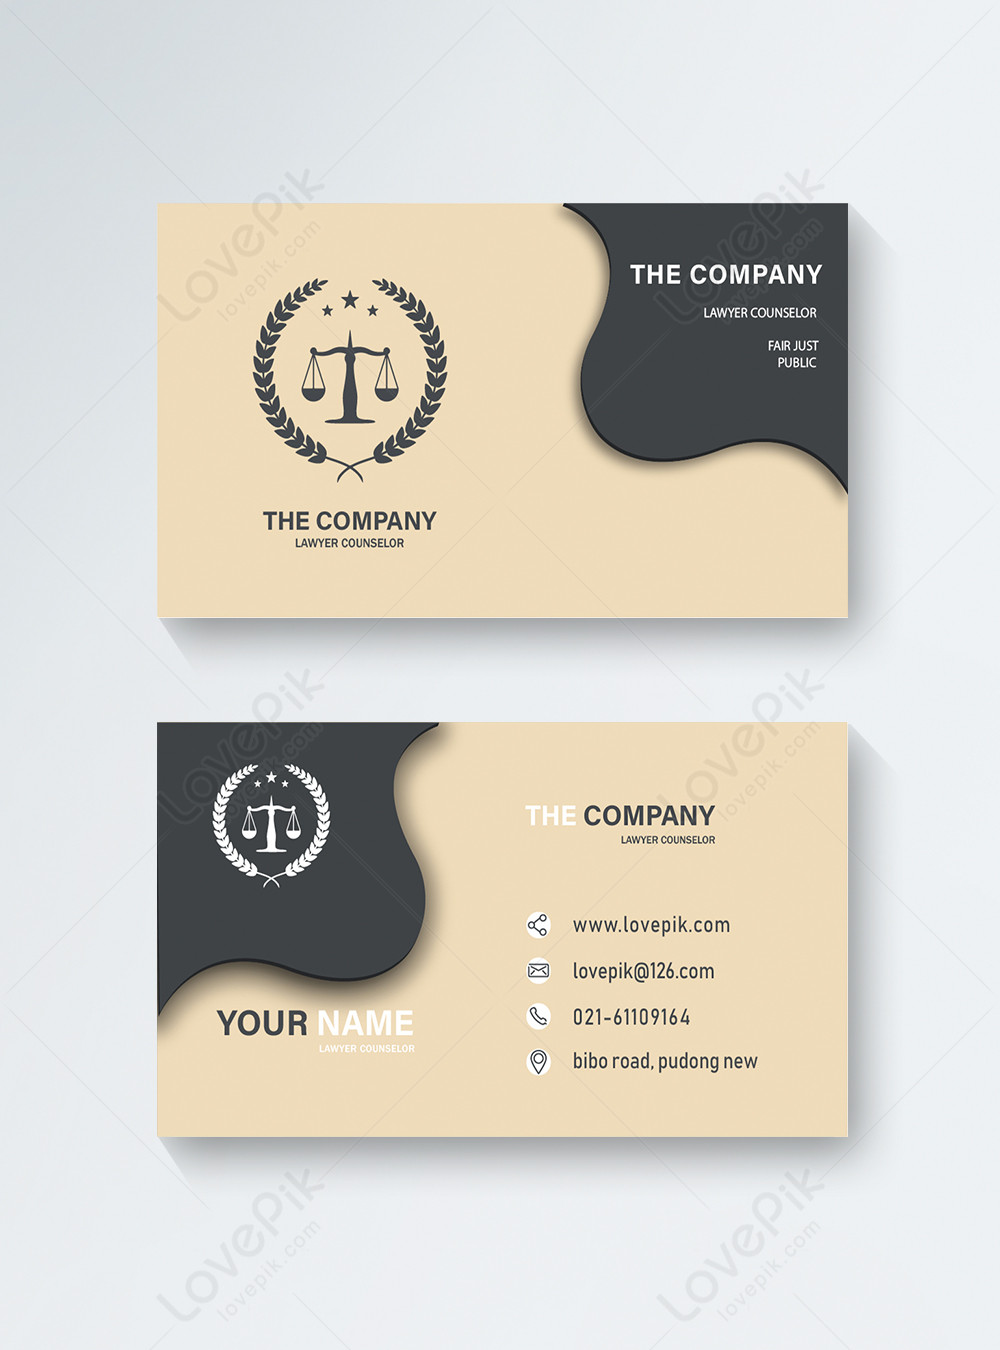 Lawyer business card template image_picture free download Regarding Legal Business Cards Templates Free